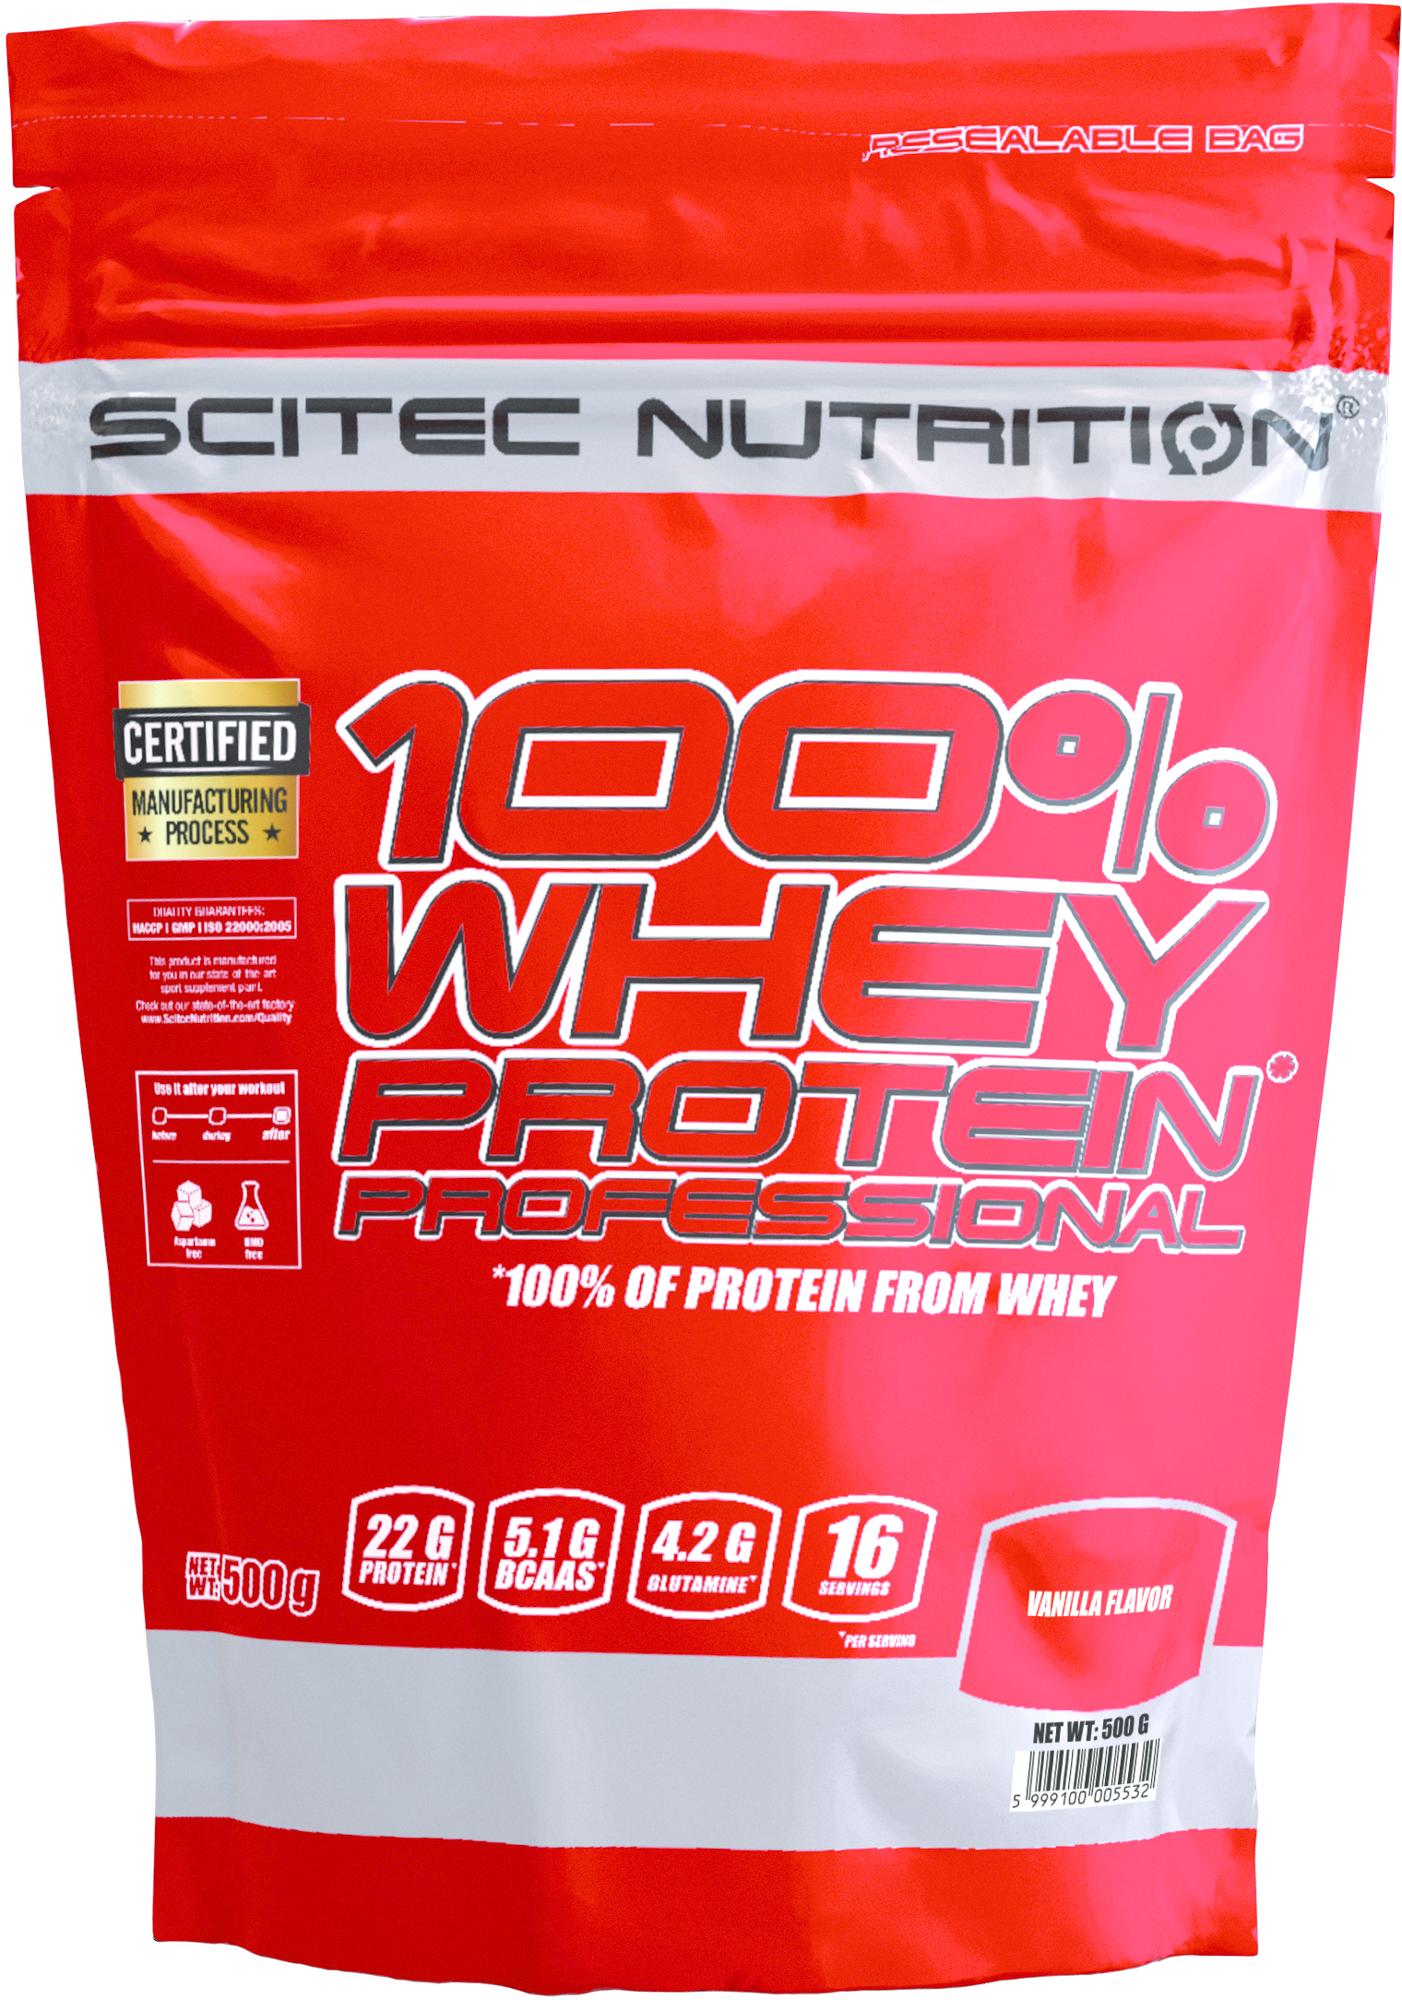 Scitec Nutrition 100% Whey Protein Professional (500g Beutel)